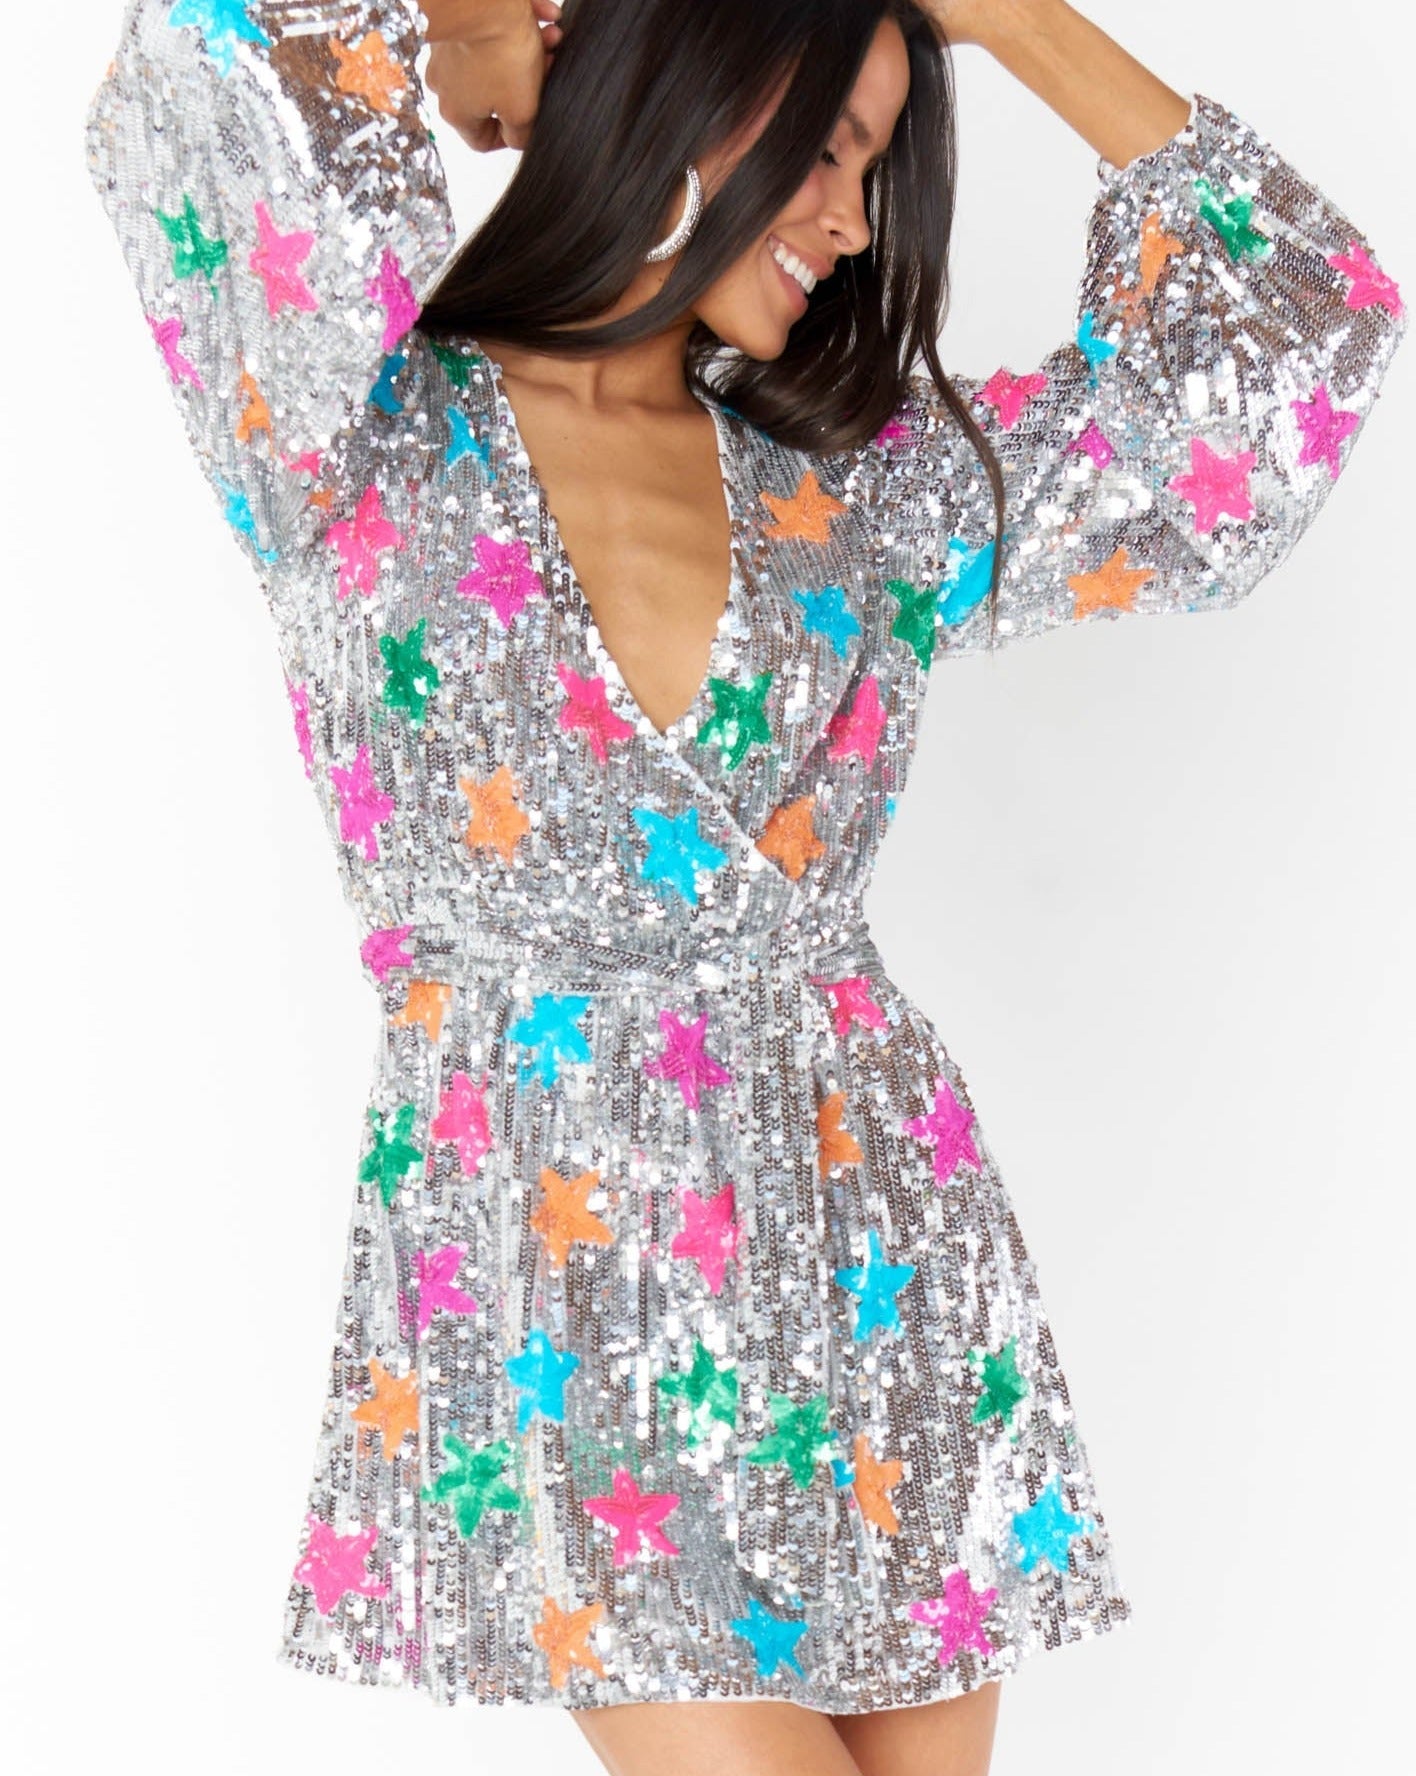 Wear Me Out Dress Rainbow Star Sequins